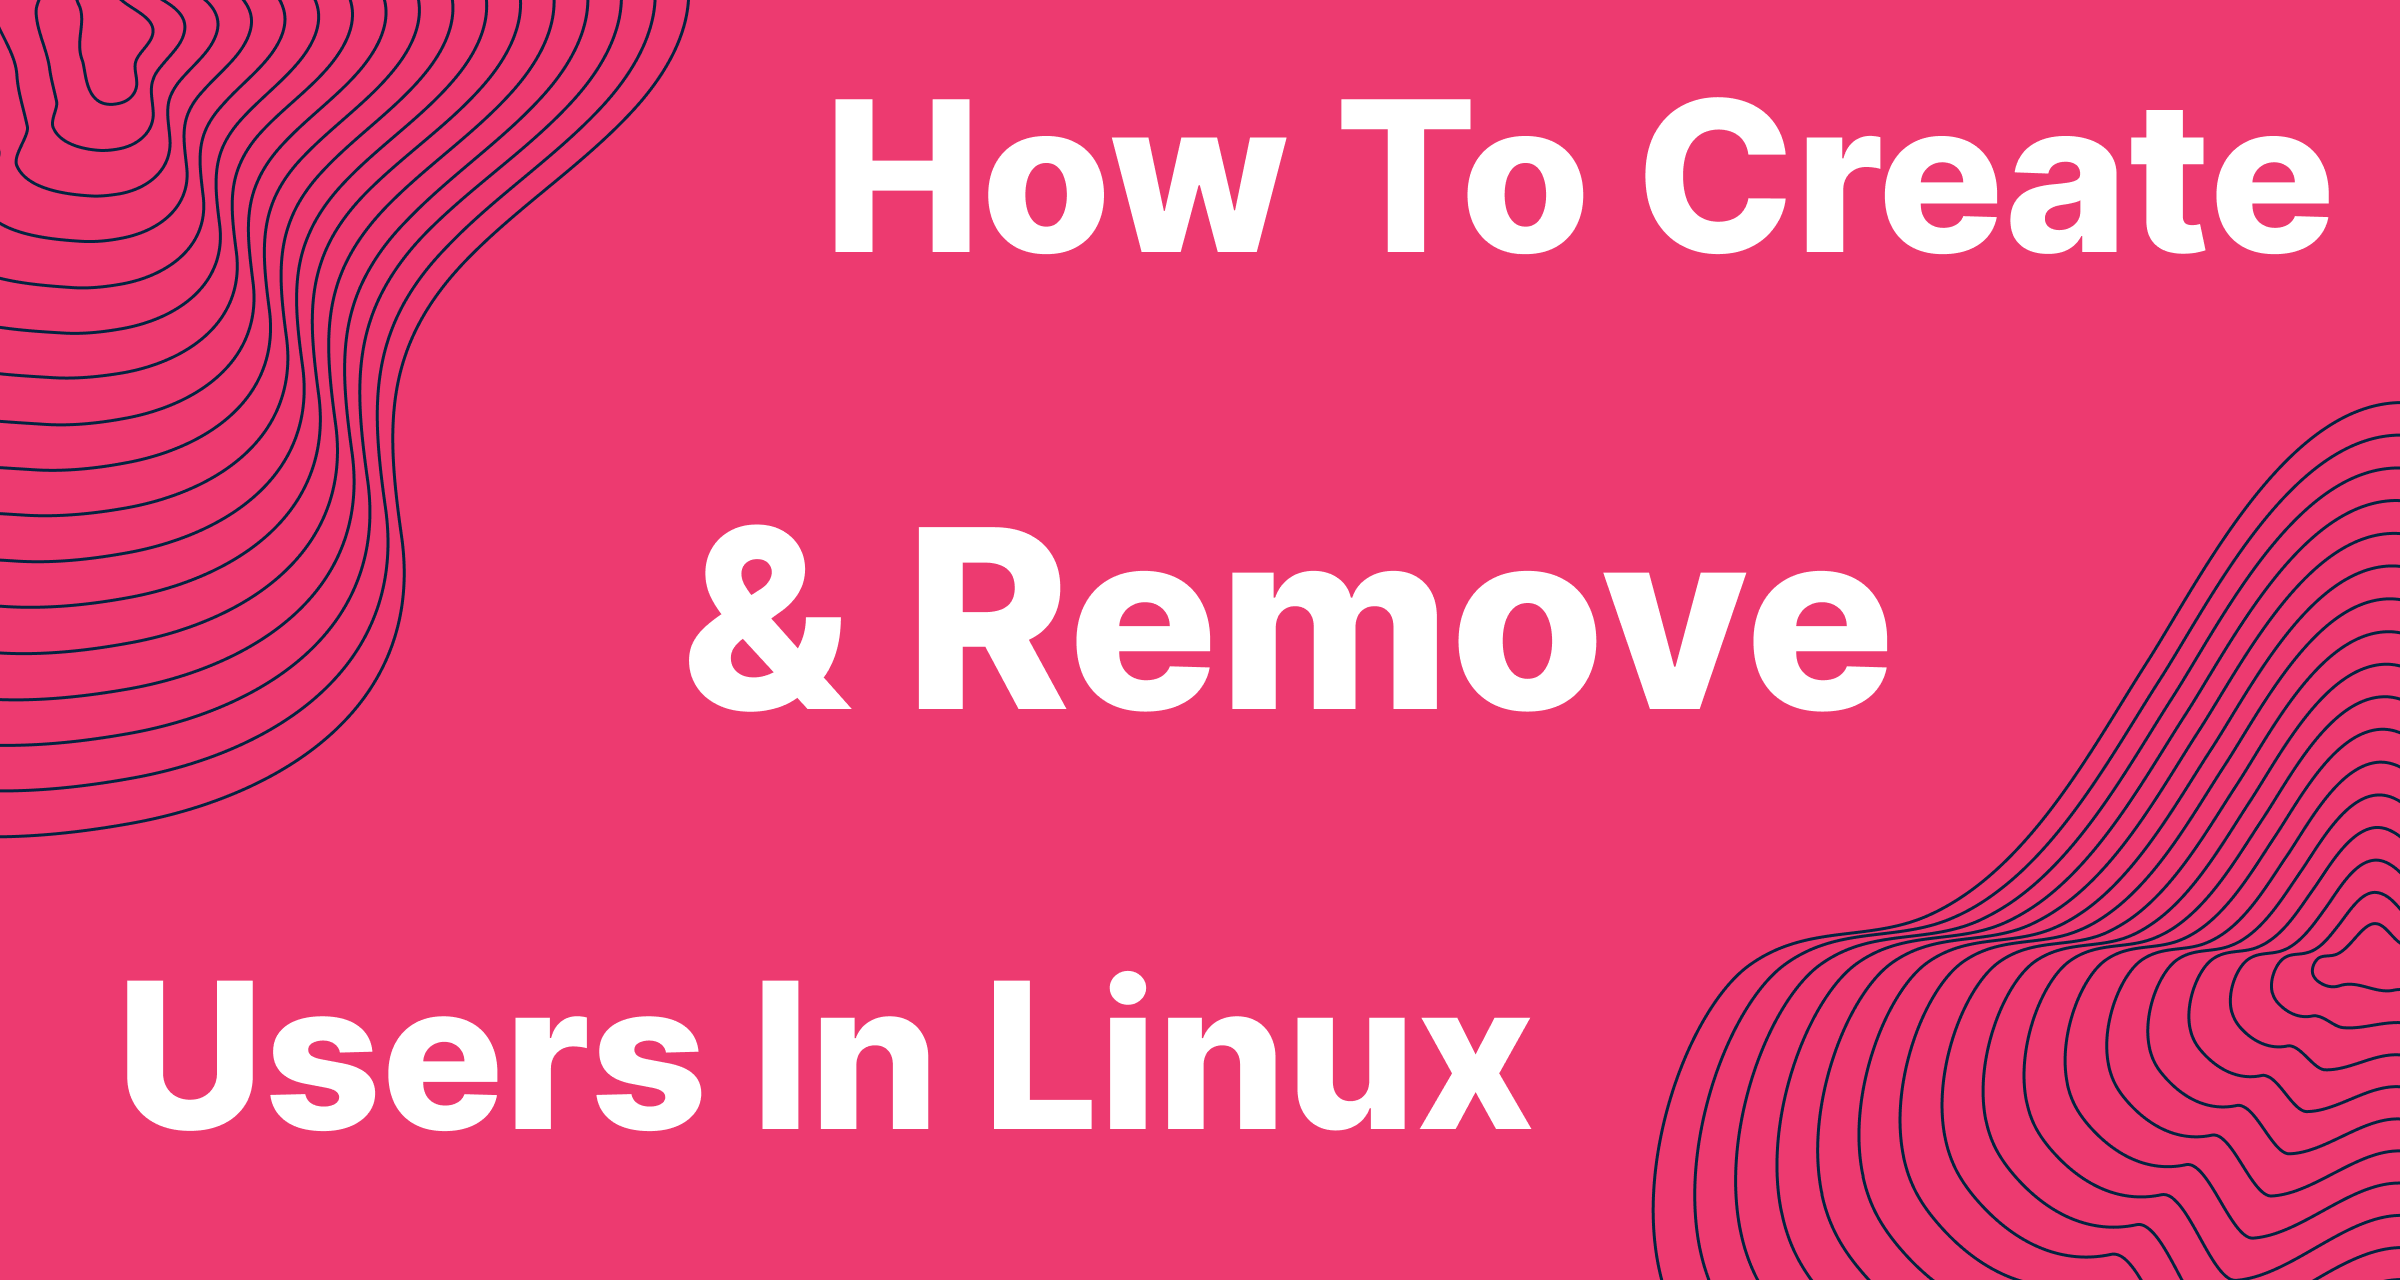 How to create and remove users on Linux